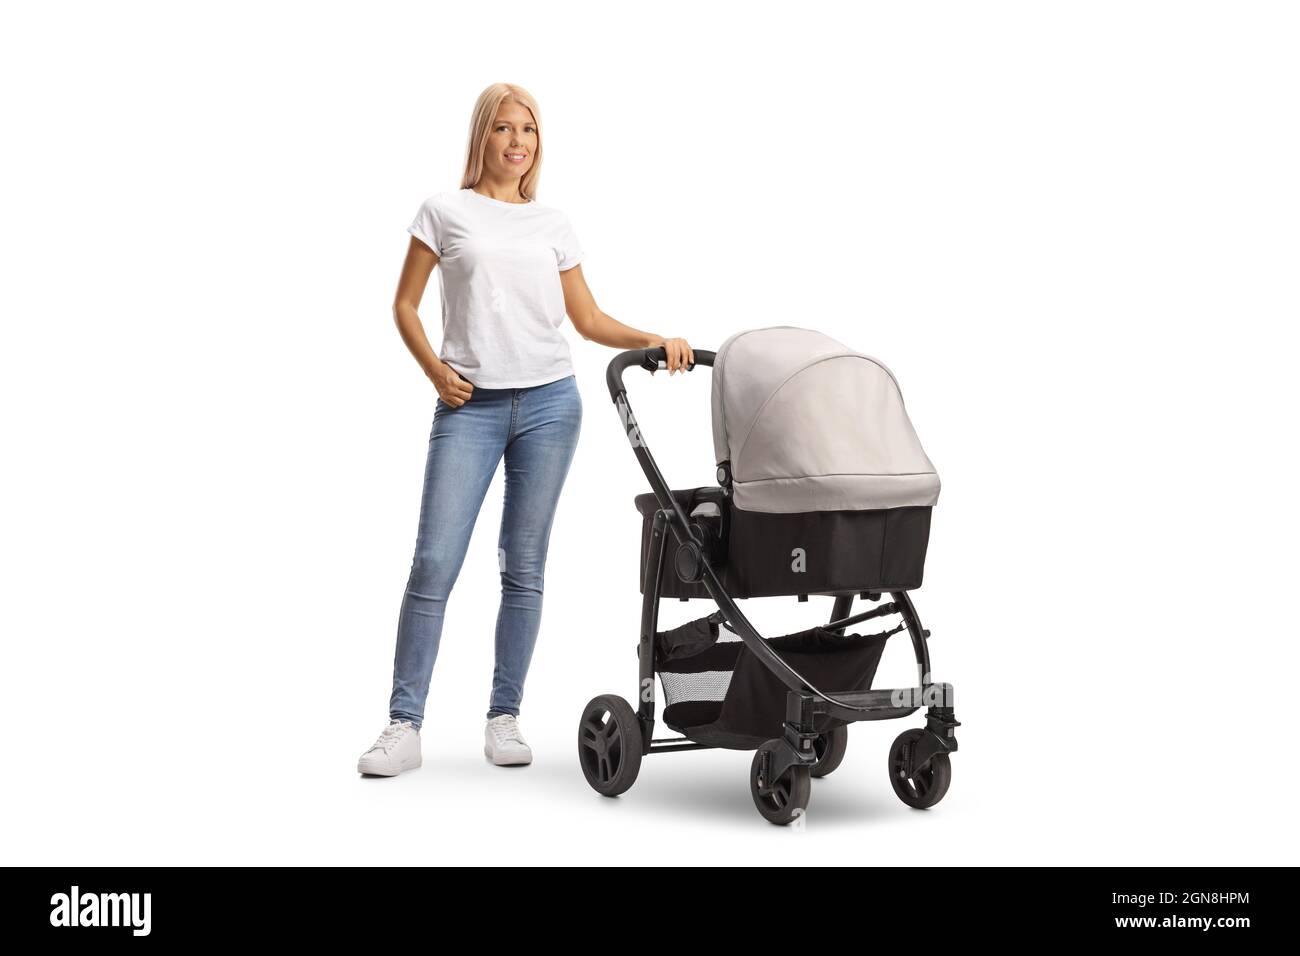 Full length portrait of a young woman in jeans with a pushchair isolated on white background Stock Photo